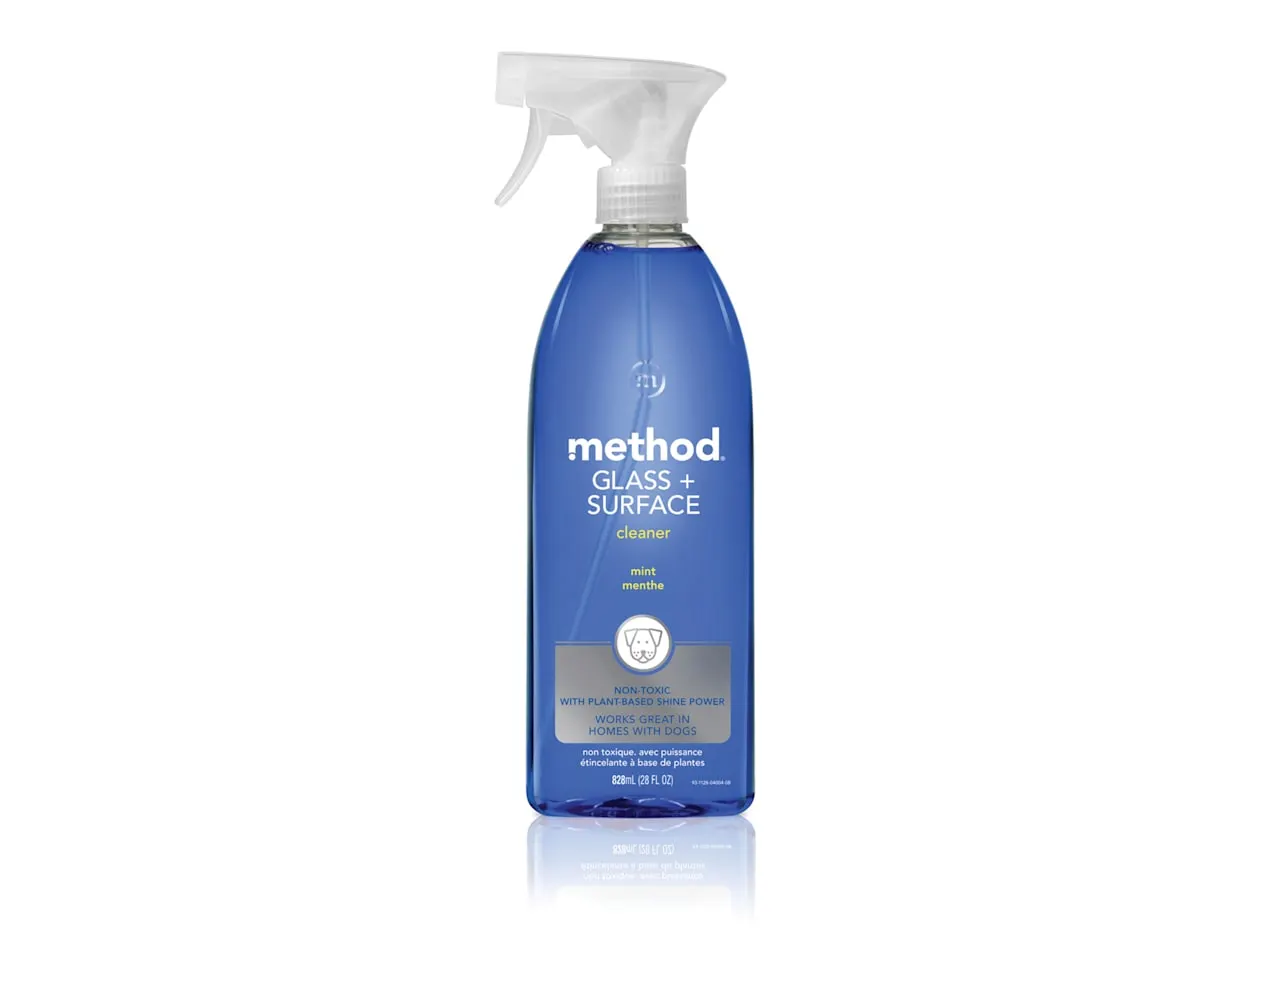 METHOD Dog House Friendly Mint Glass Cleaner + Surface Cleaner, 28 fl. oz.